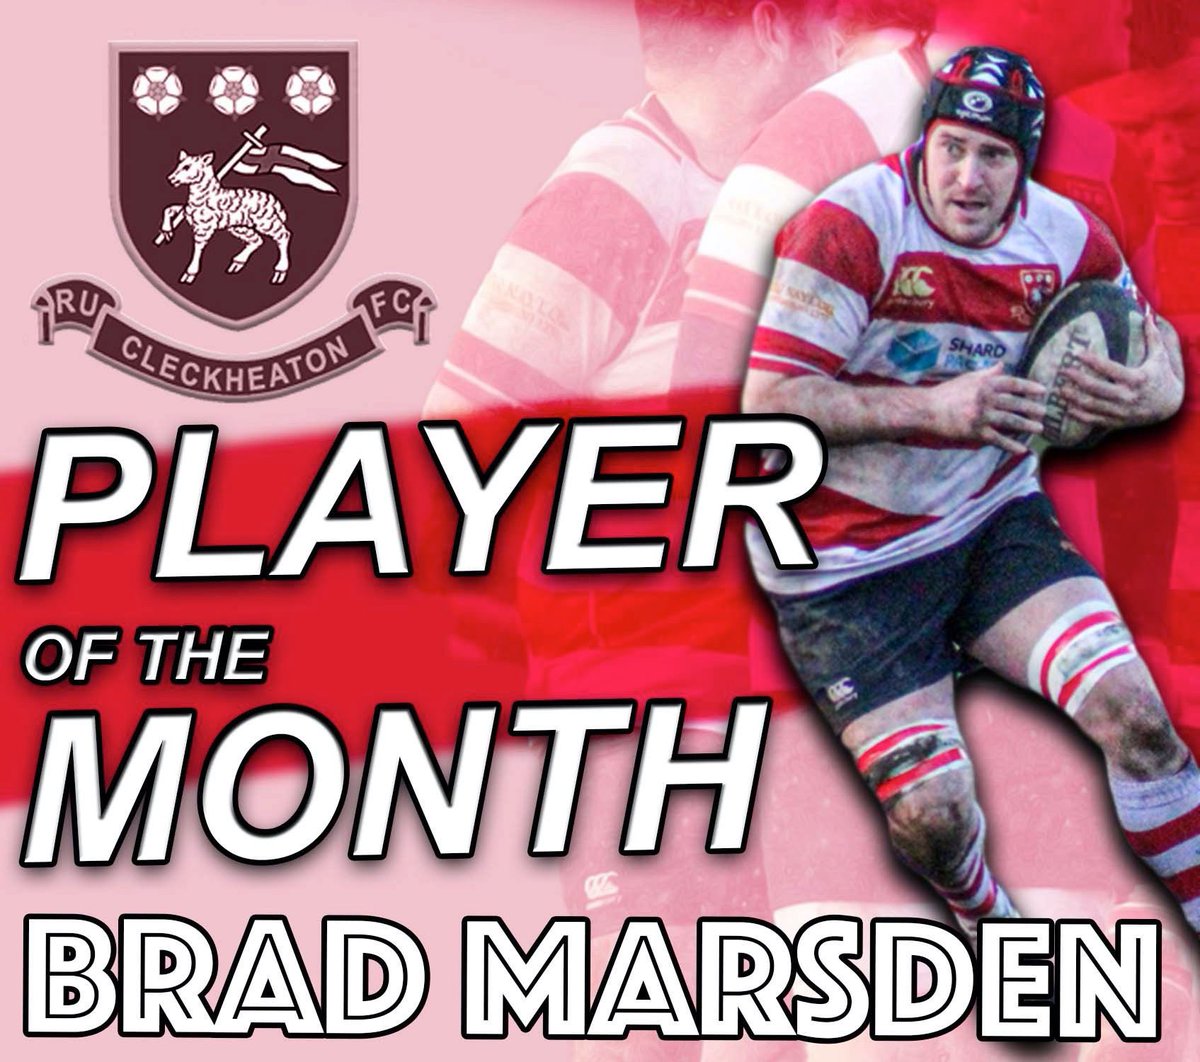 Our first XV player of the month is Brad Marsden. 👏🏼👏🏼👏🏼👏🏼👏🏼 ⚪️🔴⚪️🔴⚪️🔴⚪️